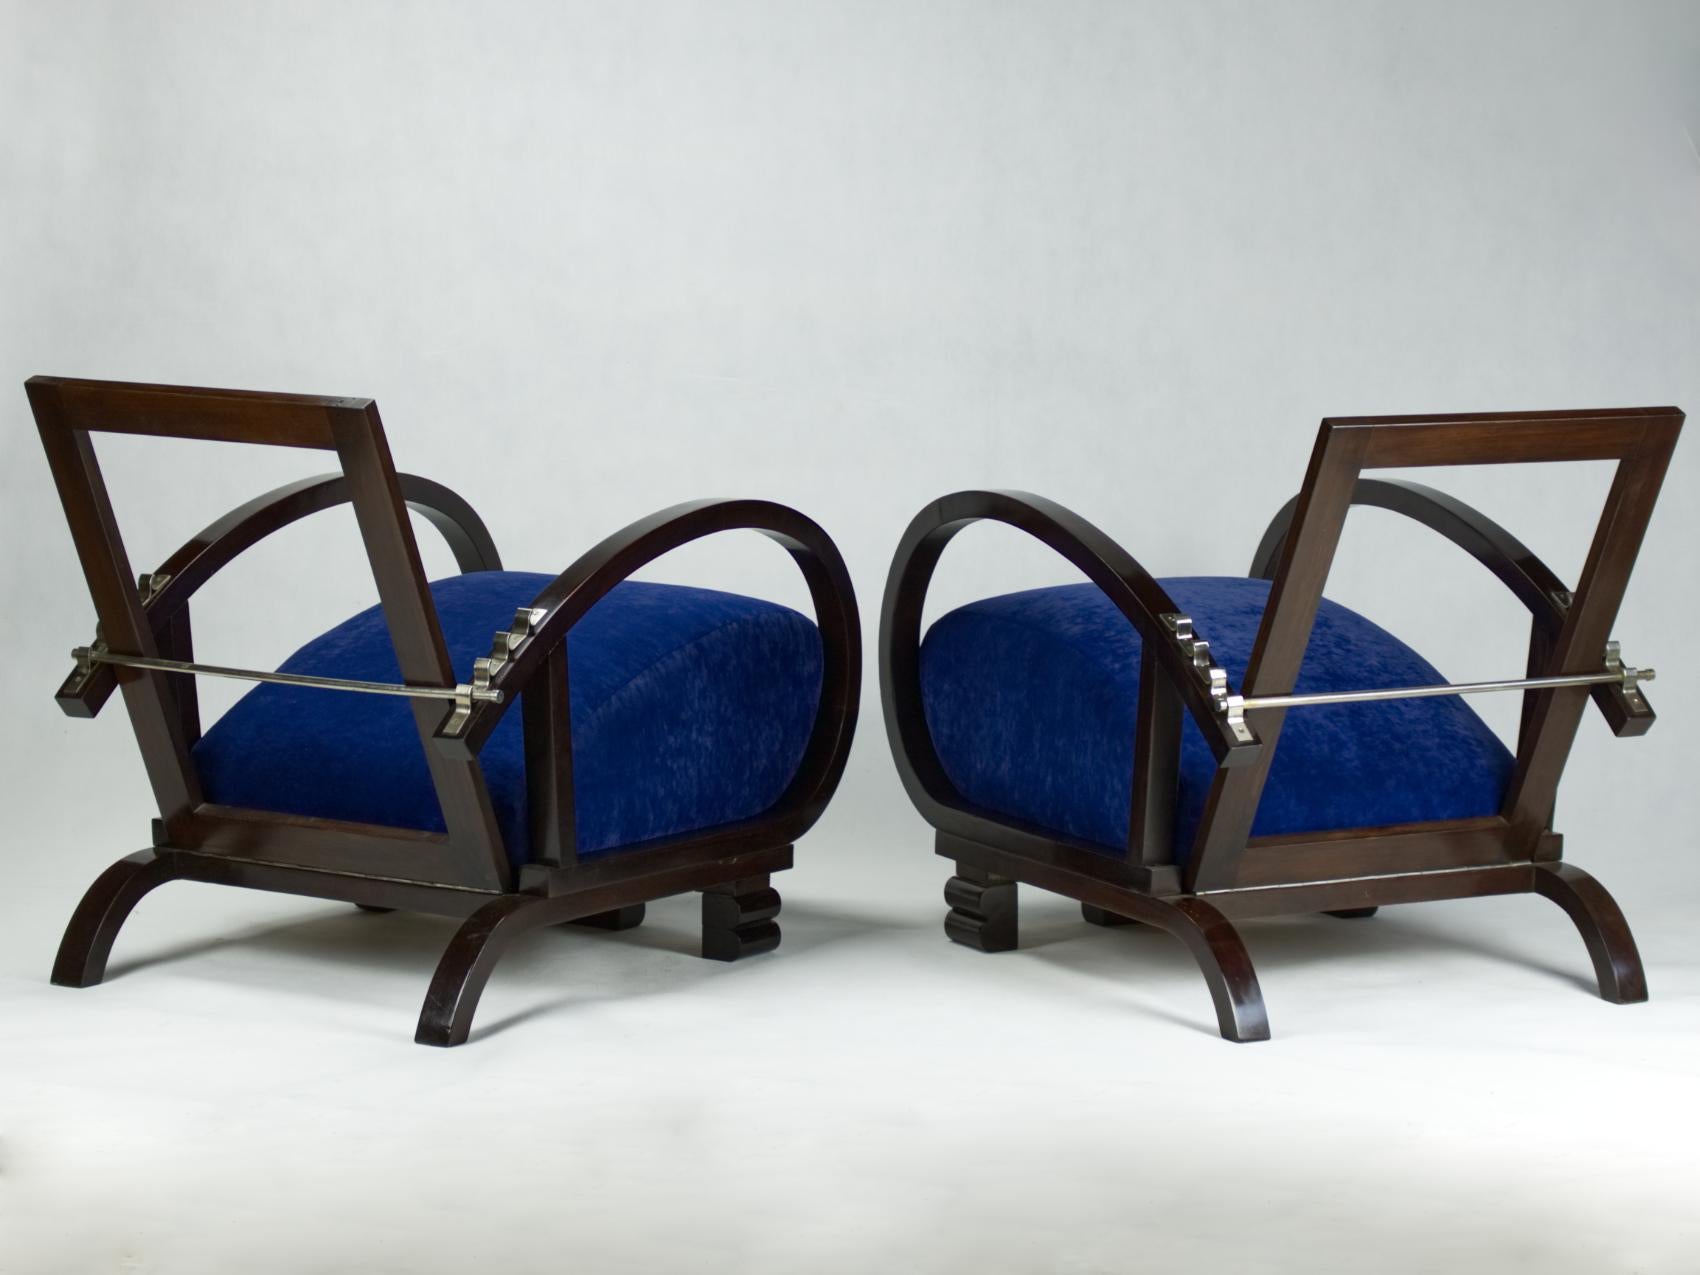 20th Century Restored Blue Art Deco Lounge Chairs, 1930s